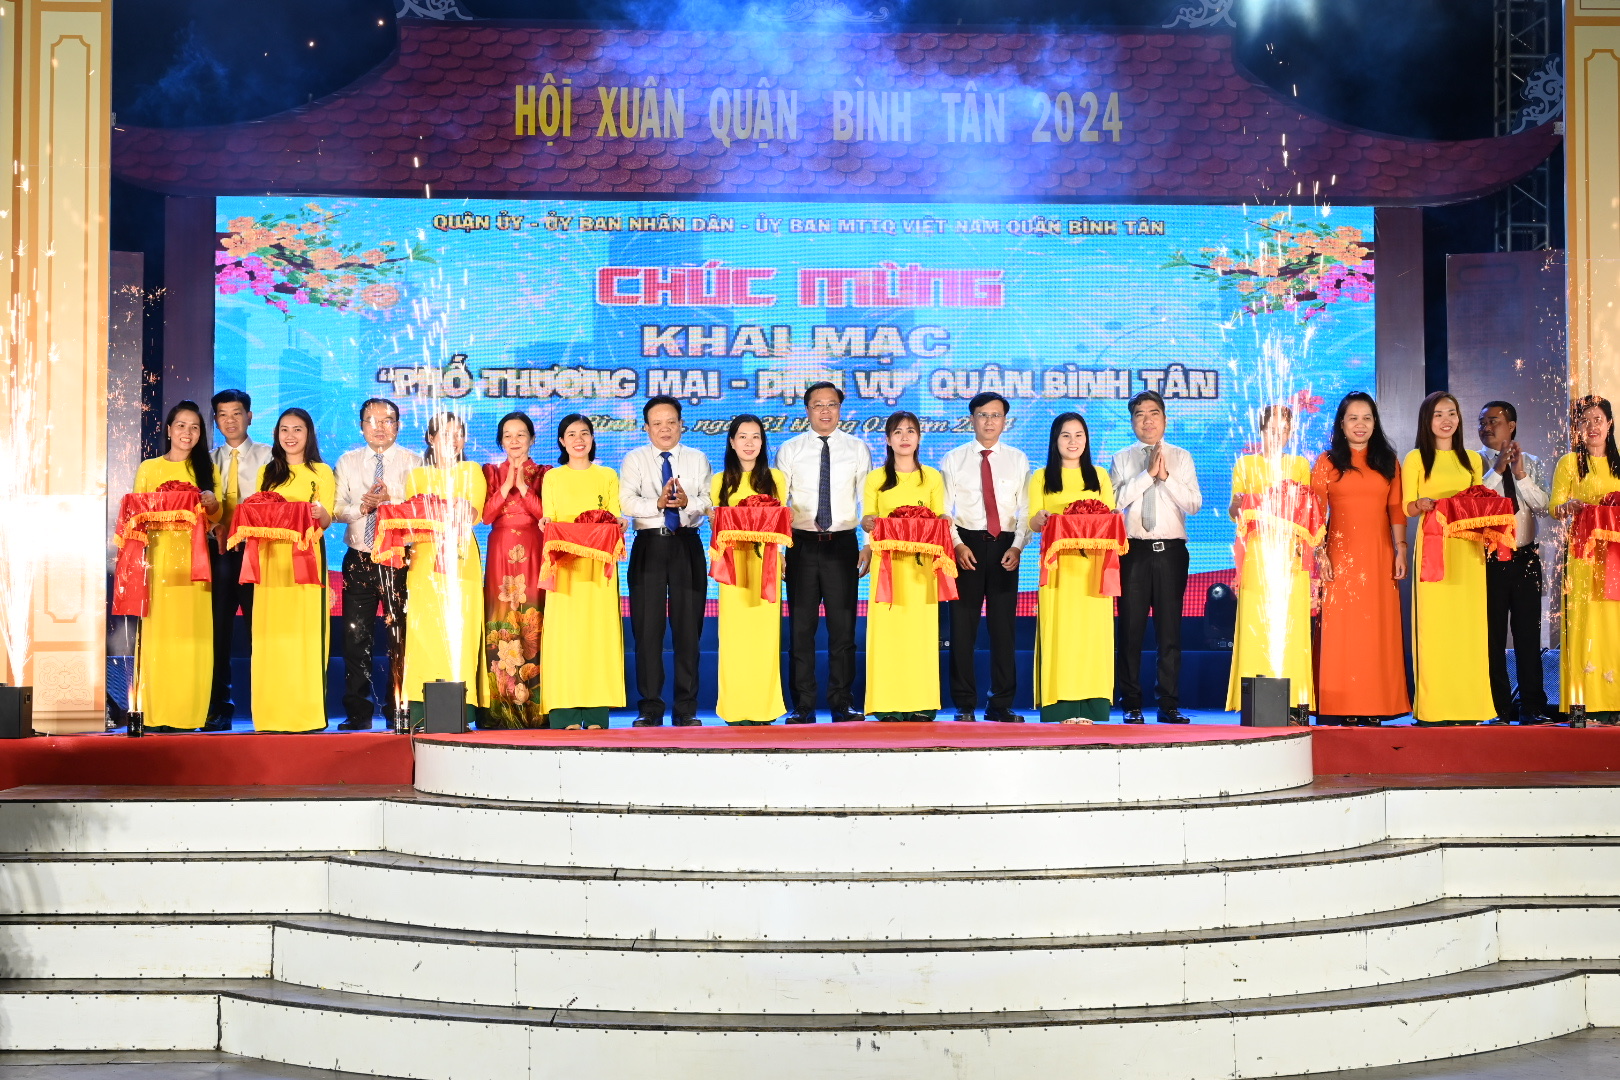 Binh Tan District Party Secretary Huynh Khac Diep and district leaders cut the ribbon to inaugurate